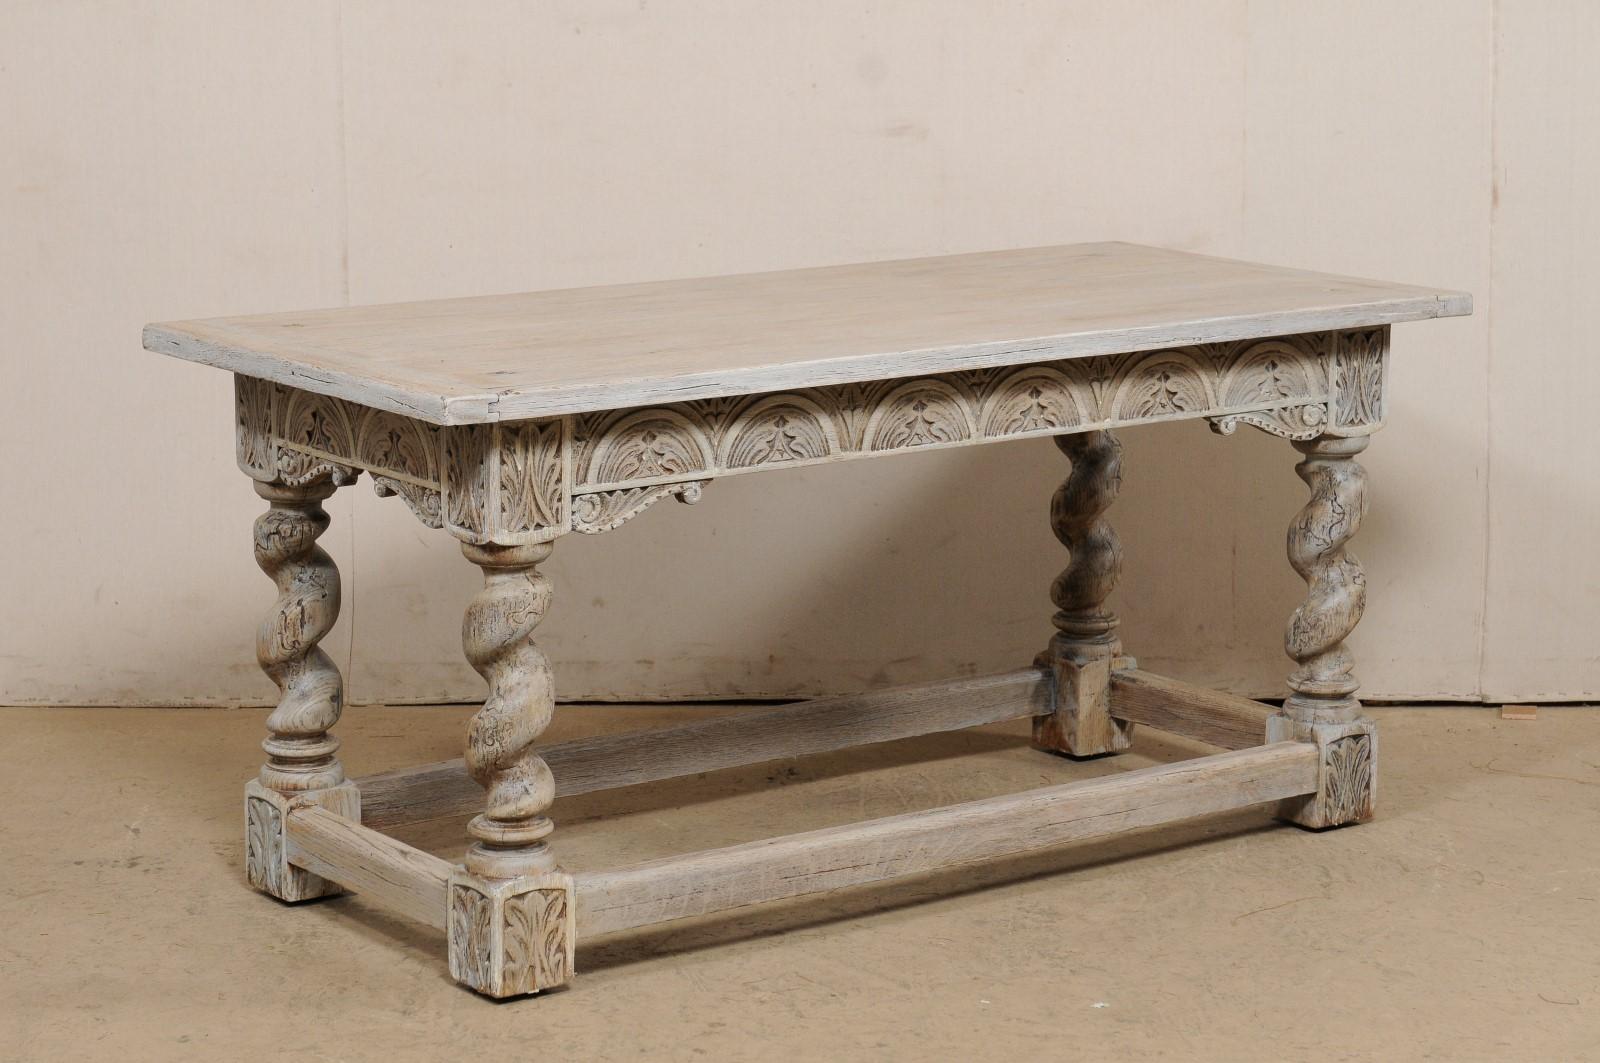 An English oak wood table with ornate carvings and barley twist legs from the 19th century. This antique table from England features an elongated rectangular top, approximately 5.5 feet in length, which rests atop an elaborately carved apron, with